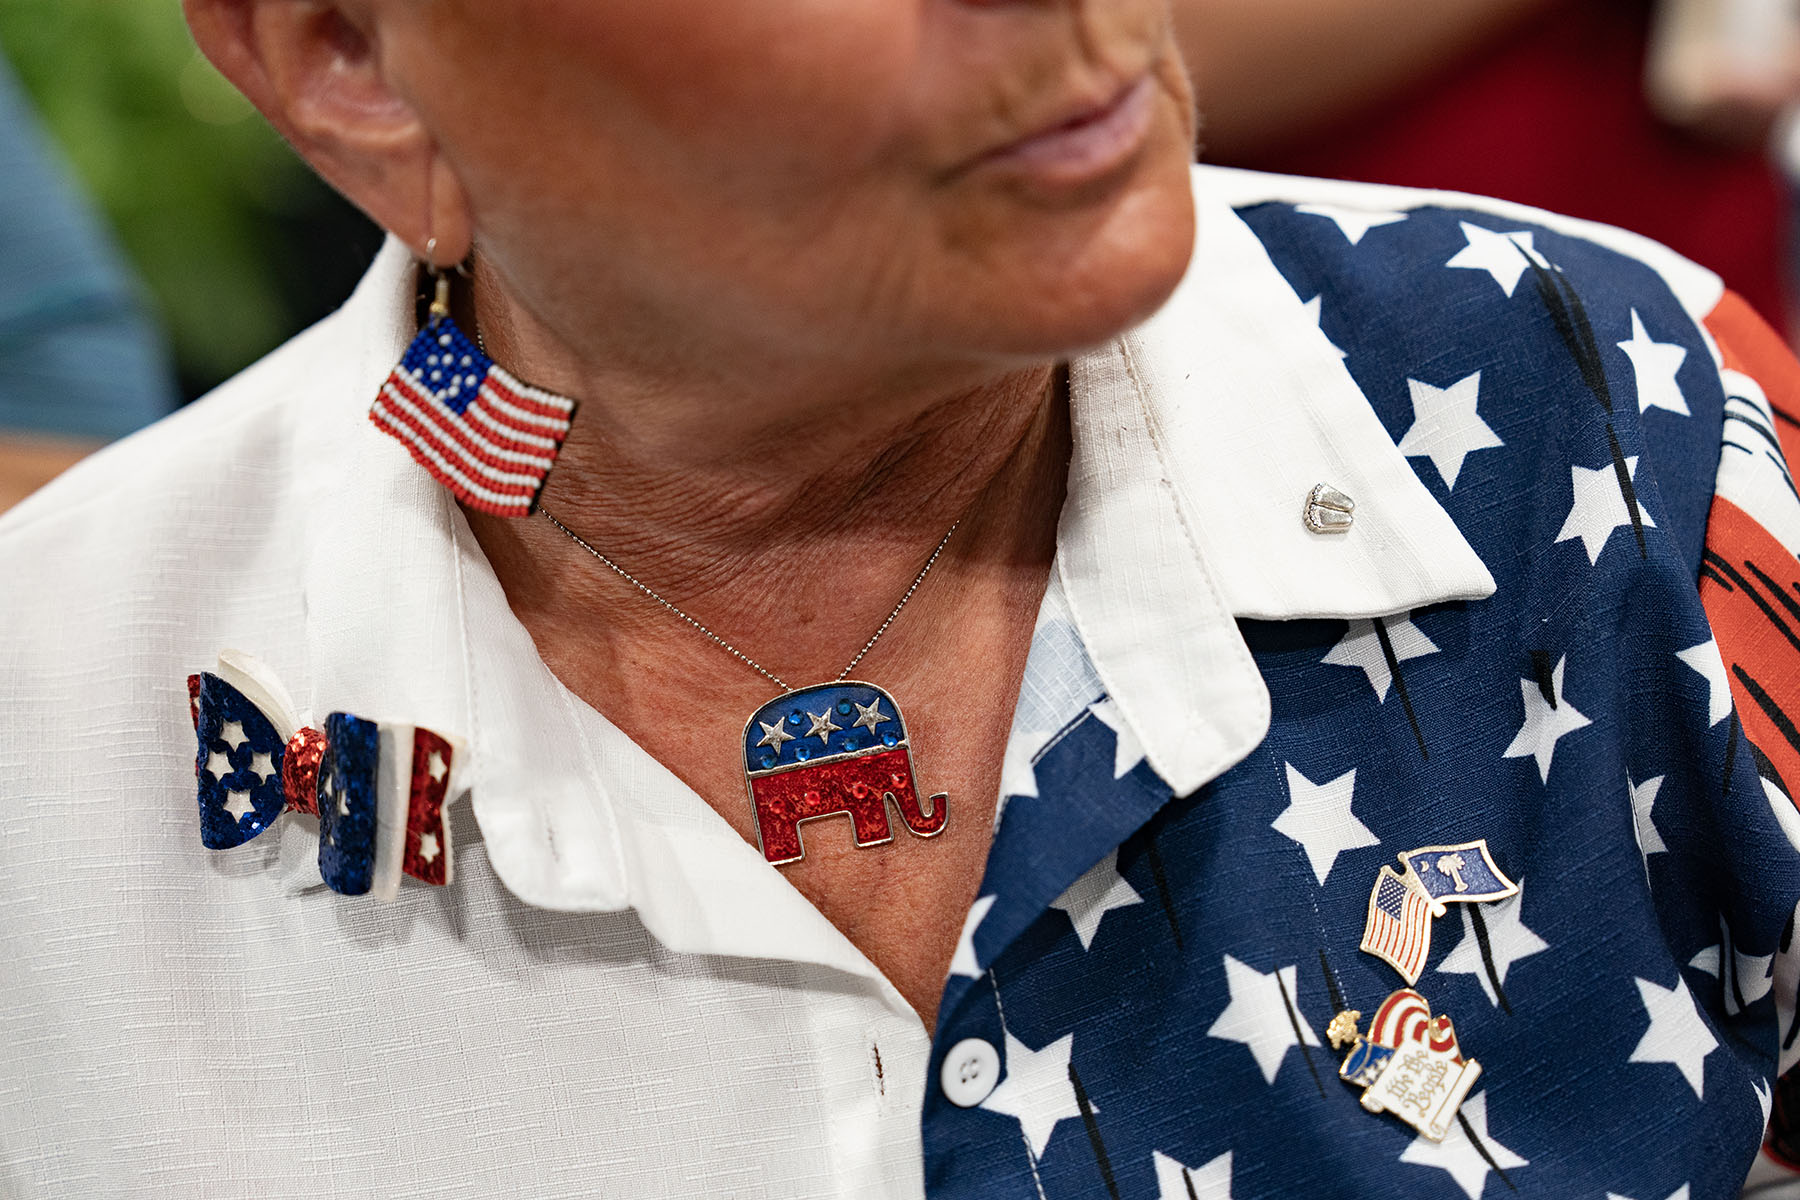 A woman wears a an American flag shirt, American flag earrings and a Republican elephant necklace as Nikki Haley speaks during a campaign event.